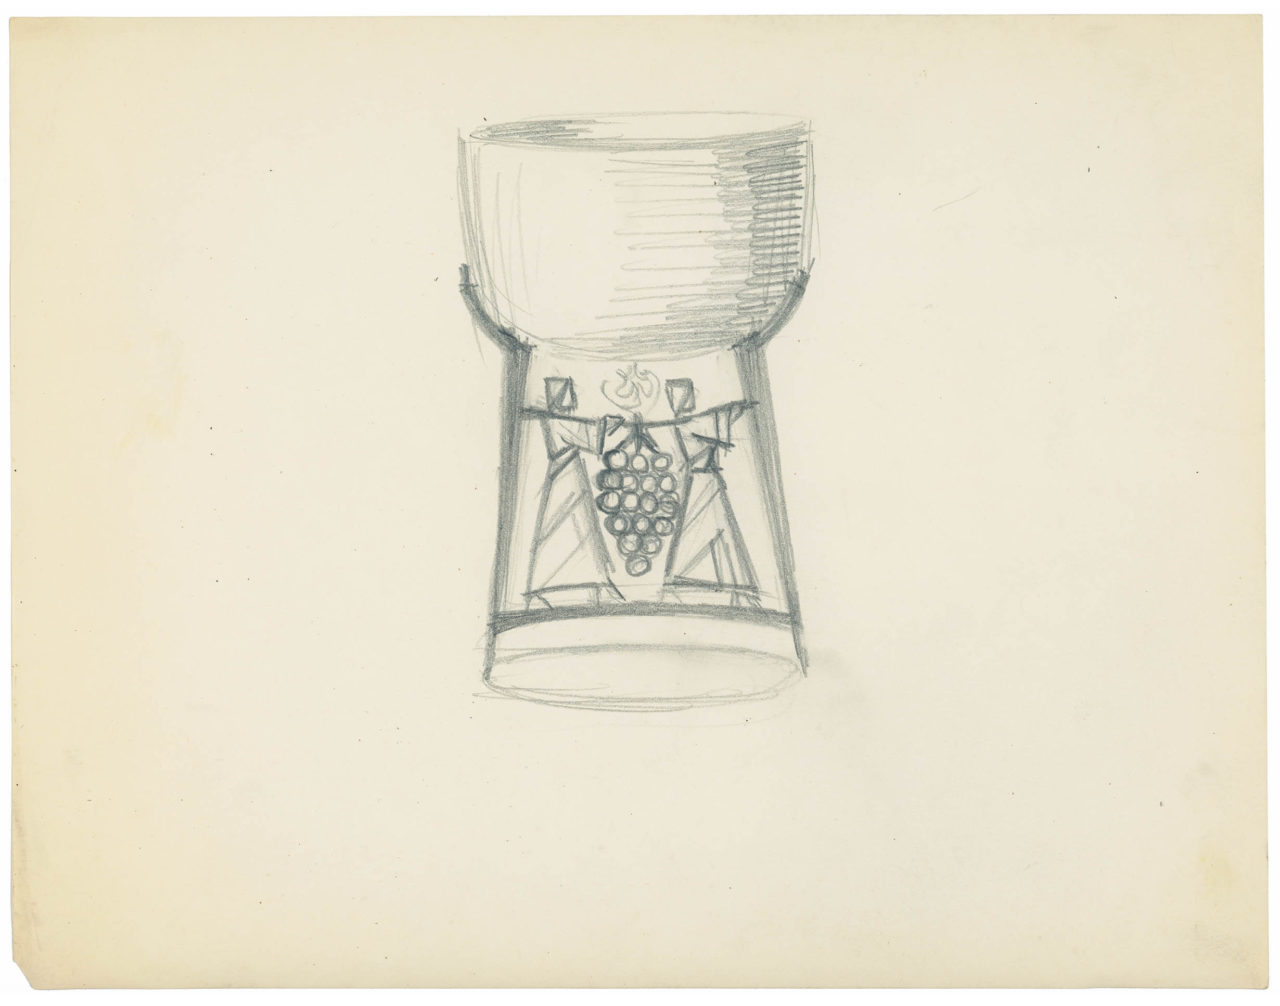 Sketch for a kiddush cup